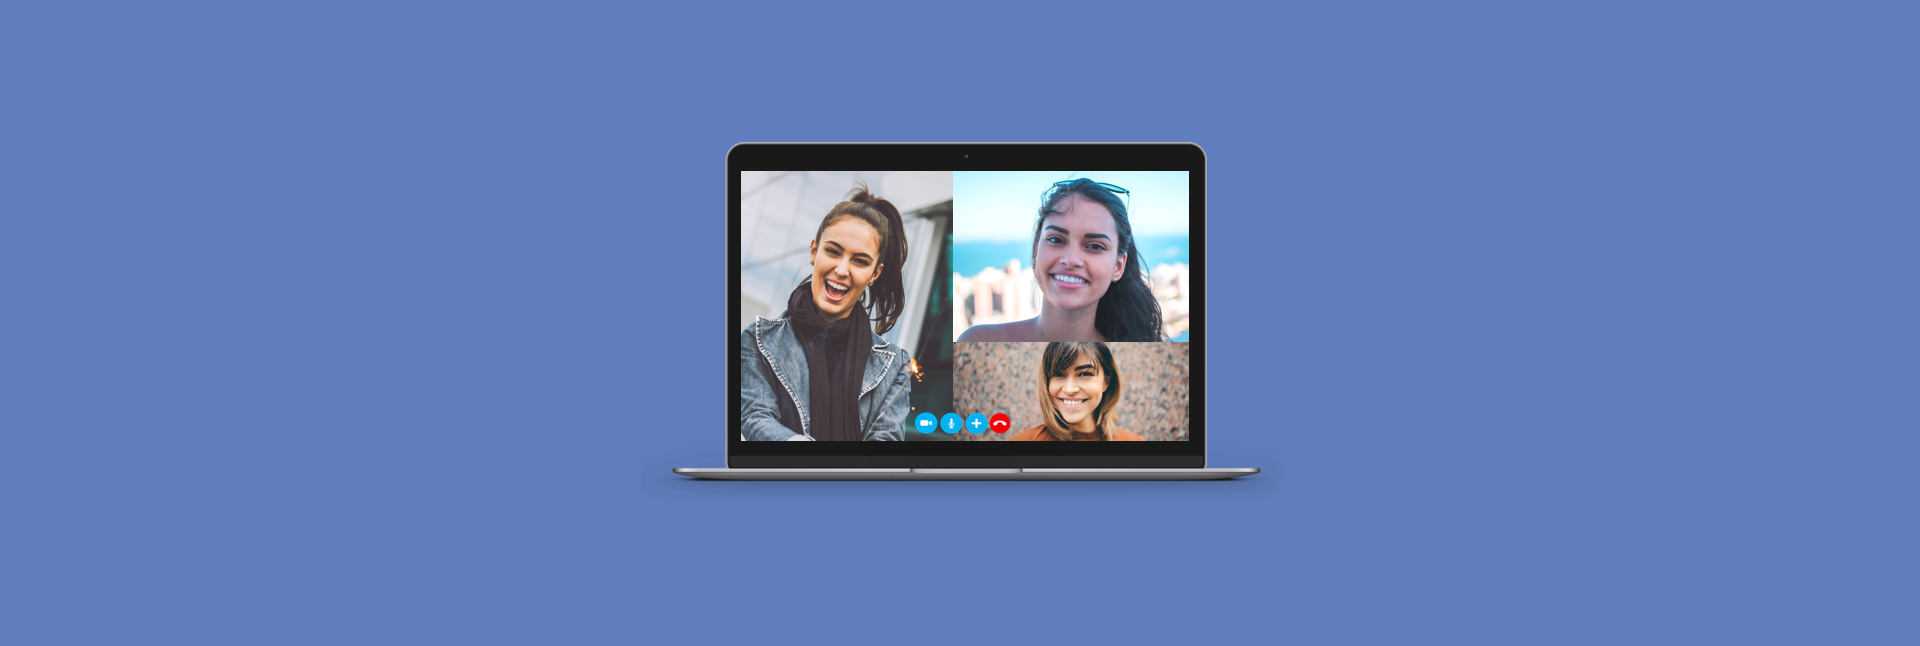 can you record a conversation on skype on a mac